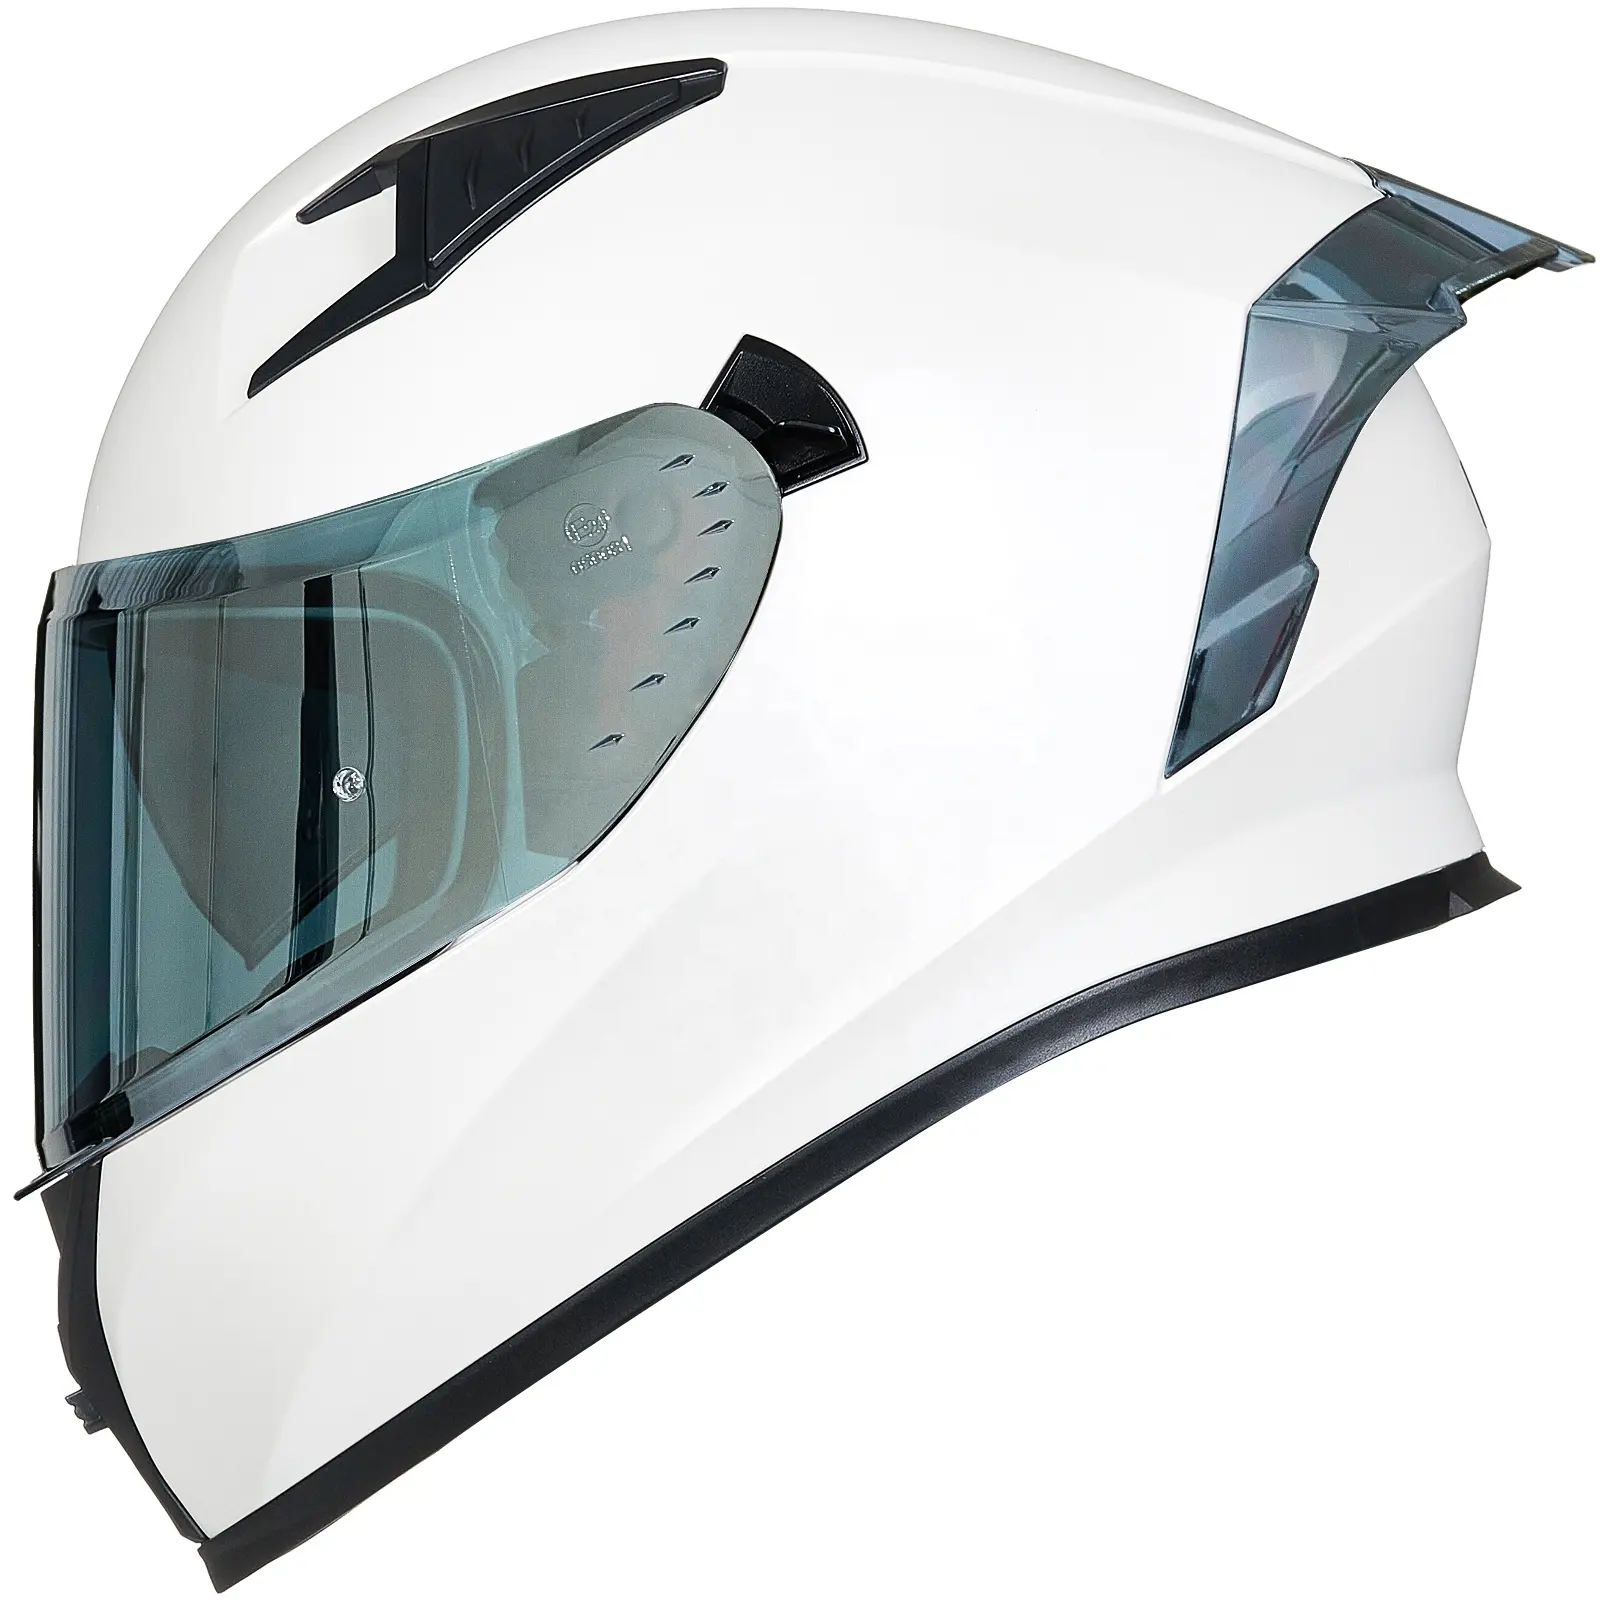 ILM Motorcycle Helmet Full Face with Pinlock Compatible Clear&Tinted Visors and Fins Street Bike Motocross Casco DOT 